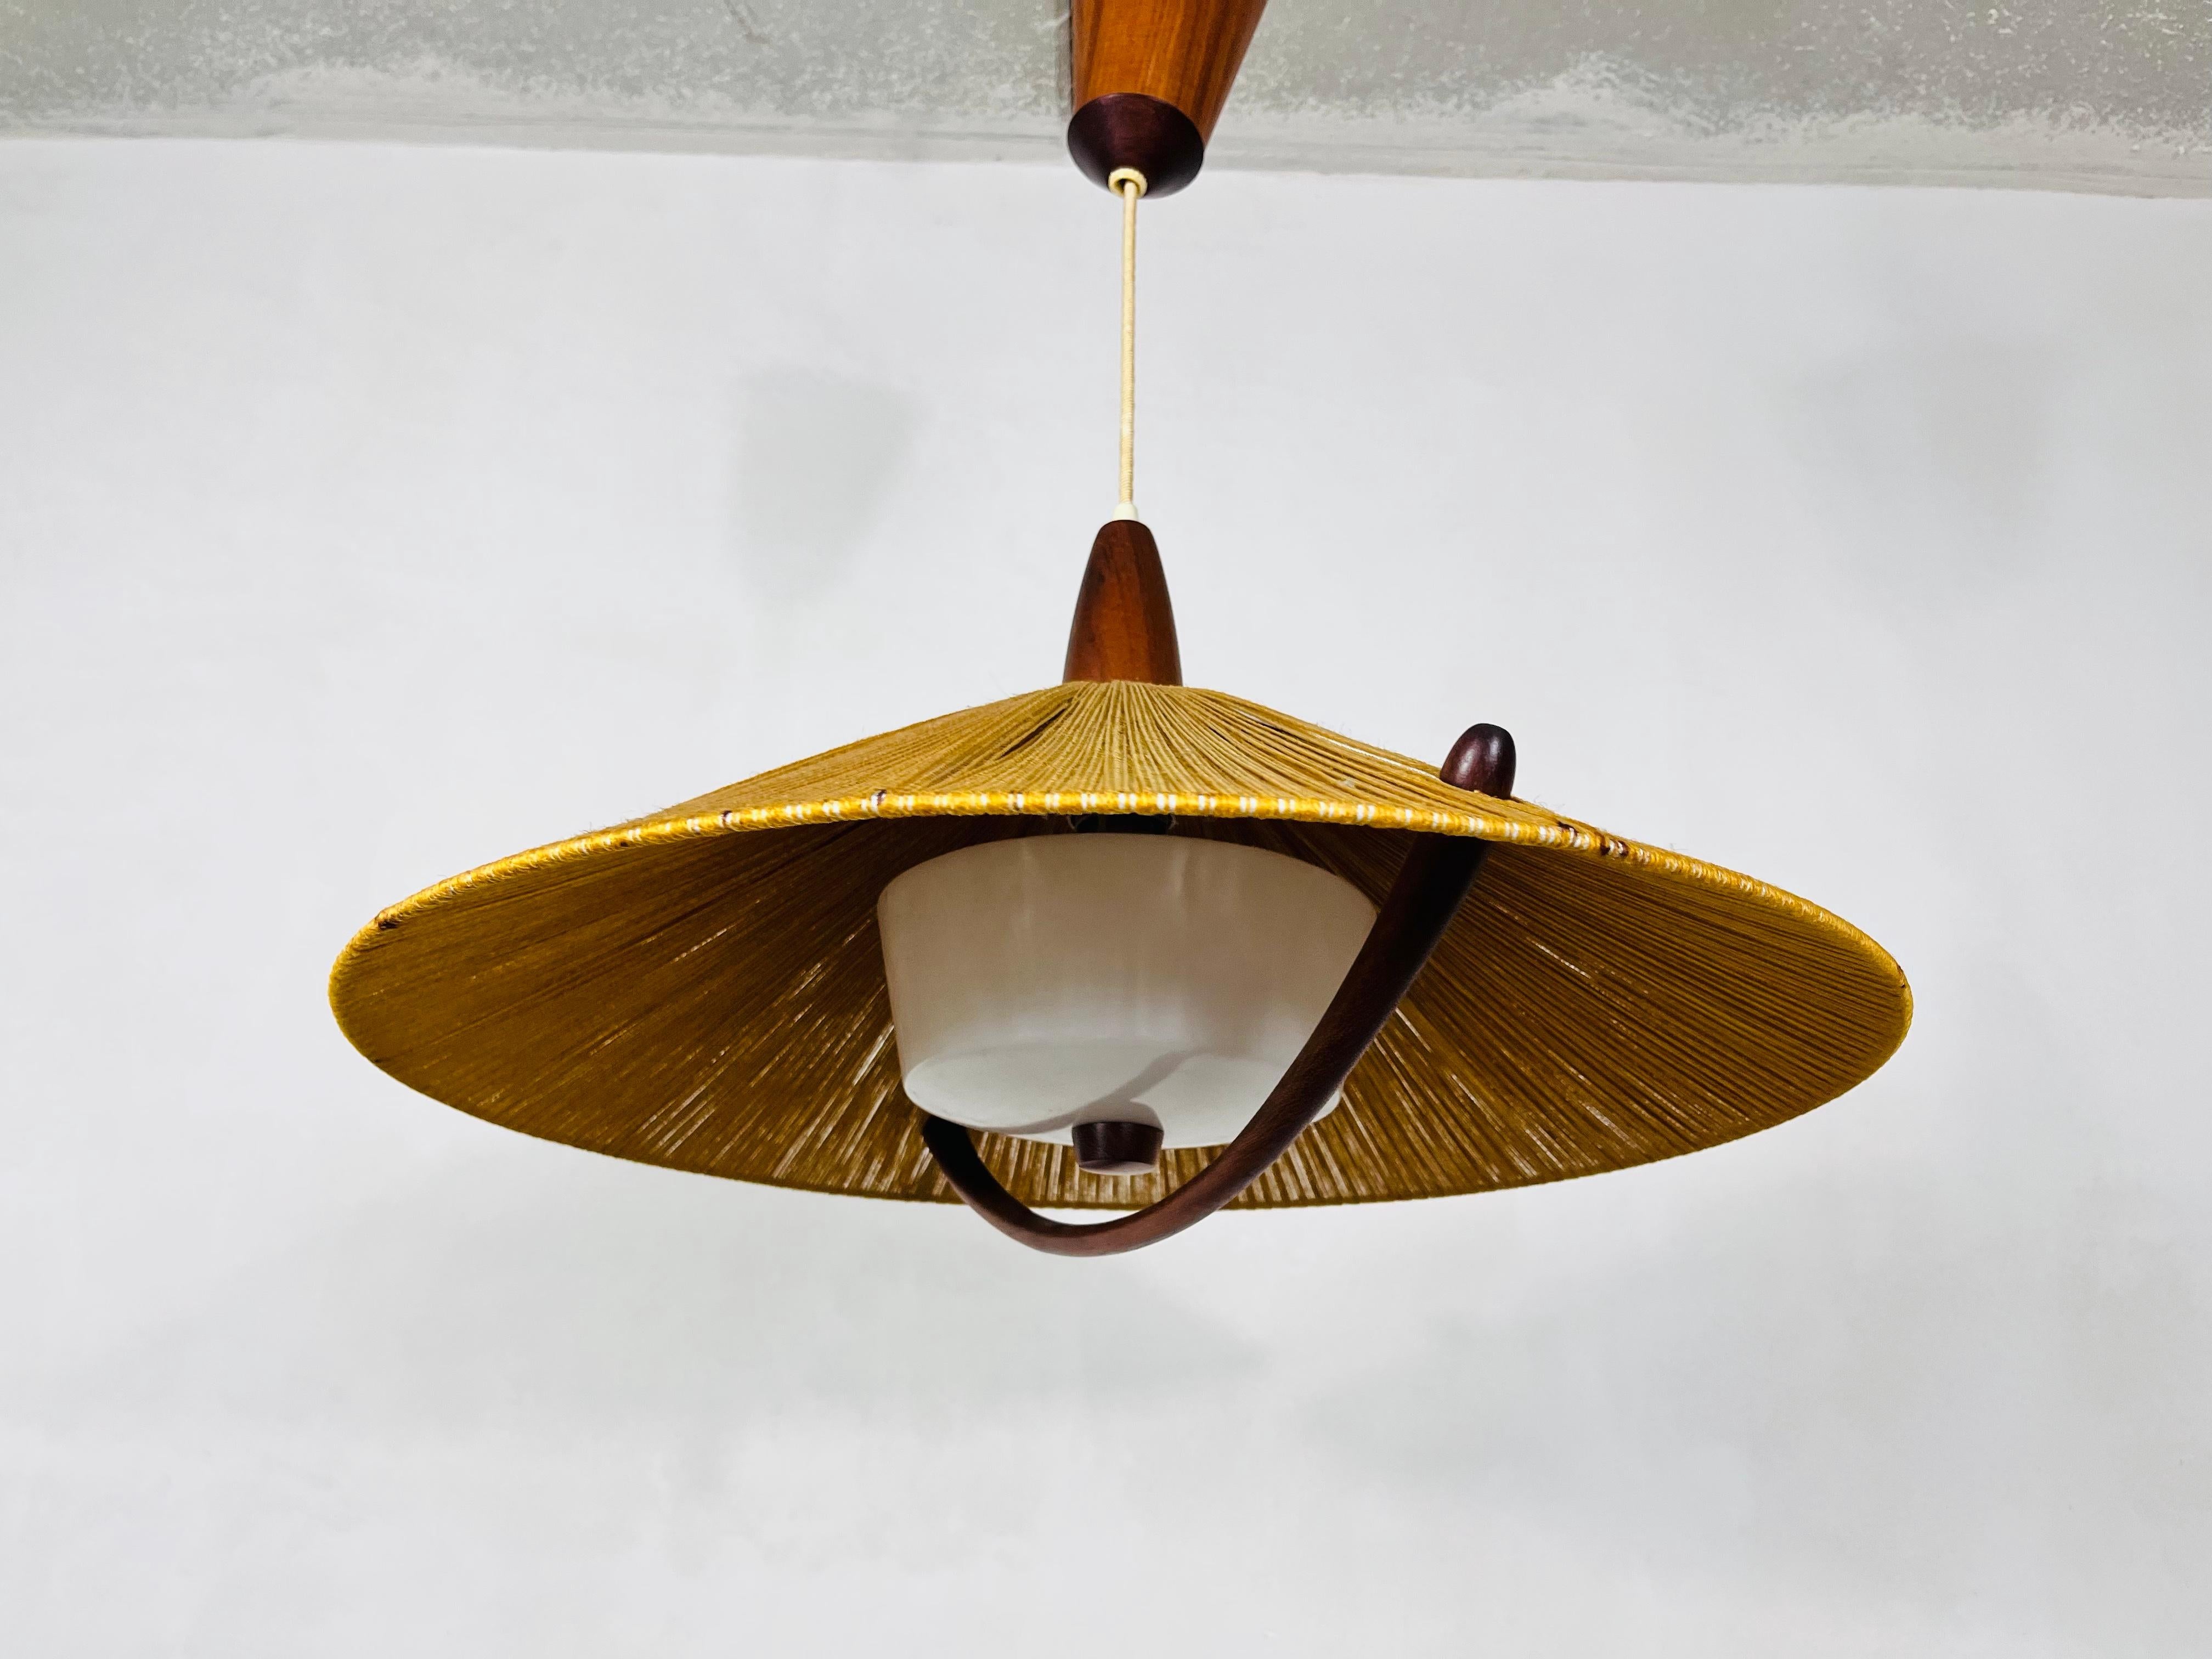 A wonderful teak hanging lamp made in the 1960s by Temde in Switzerland. It is fascinating with its rare lamp shade, which gives the lighting a wonderful japanese design.

The height is adjustable from 30 cm up to 110 cm.

The light requires one E27